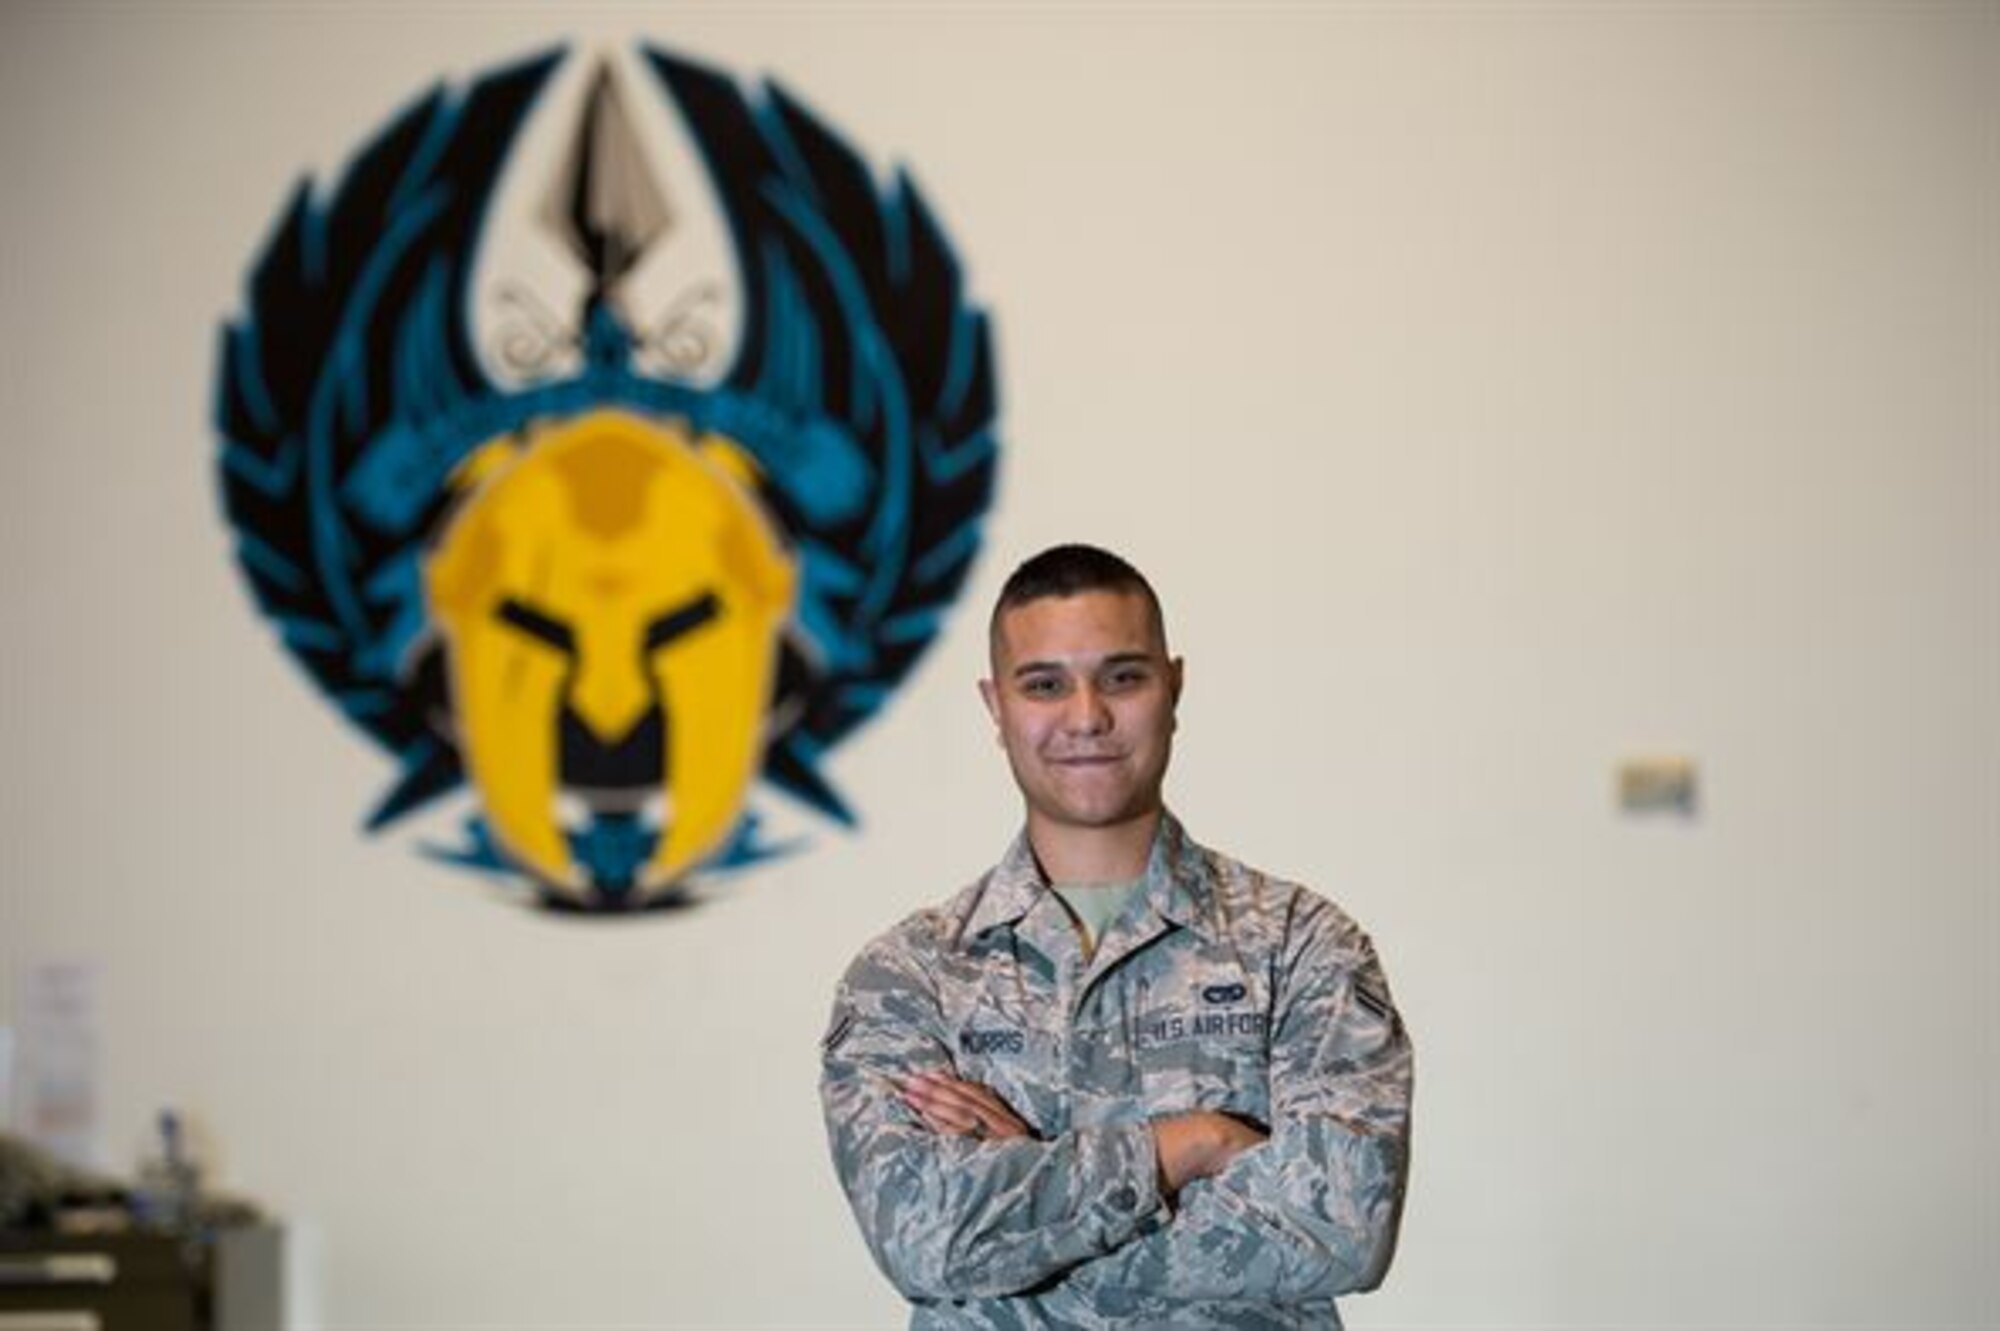 Airman 1st Class Benjamin Morris, 821st Contingency Response Squadron aerial porter, poses for a photograph at Travis Air Force Base, Calif., Spet. 6, 2016.